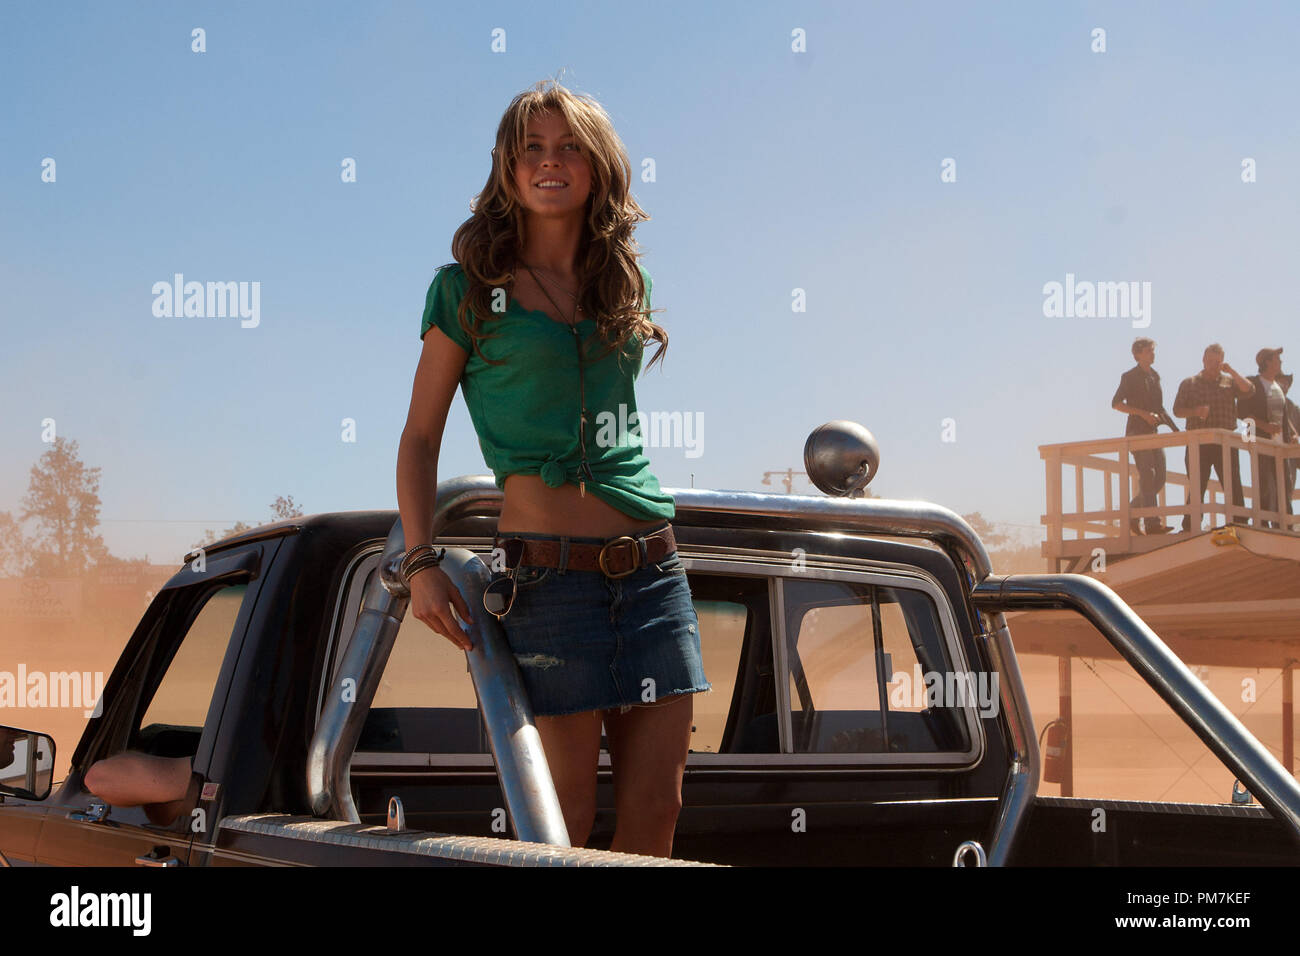 Julianne Hough plays Ariel in FOOTLOOSE, from Paramount Pictures and Spyglass Entertainment. Stock Photo